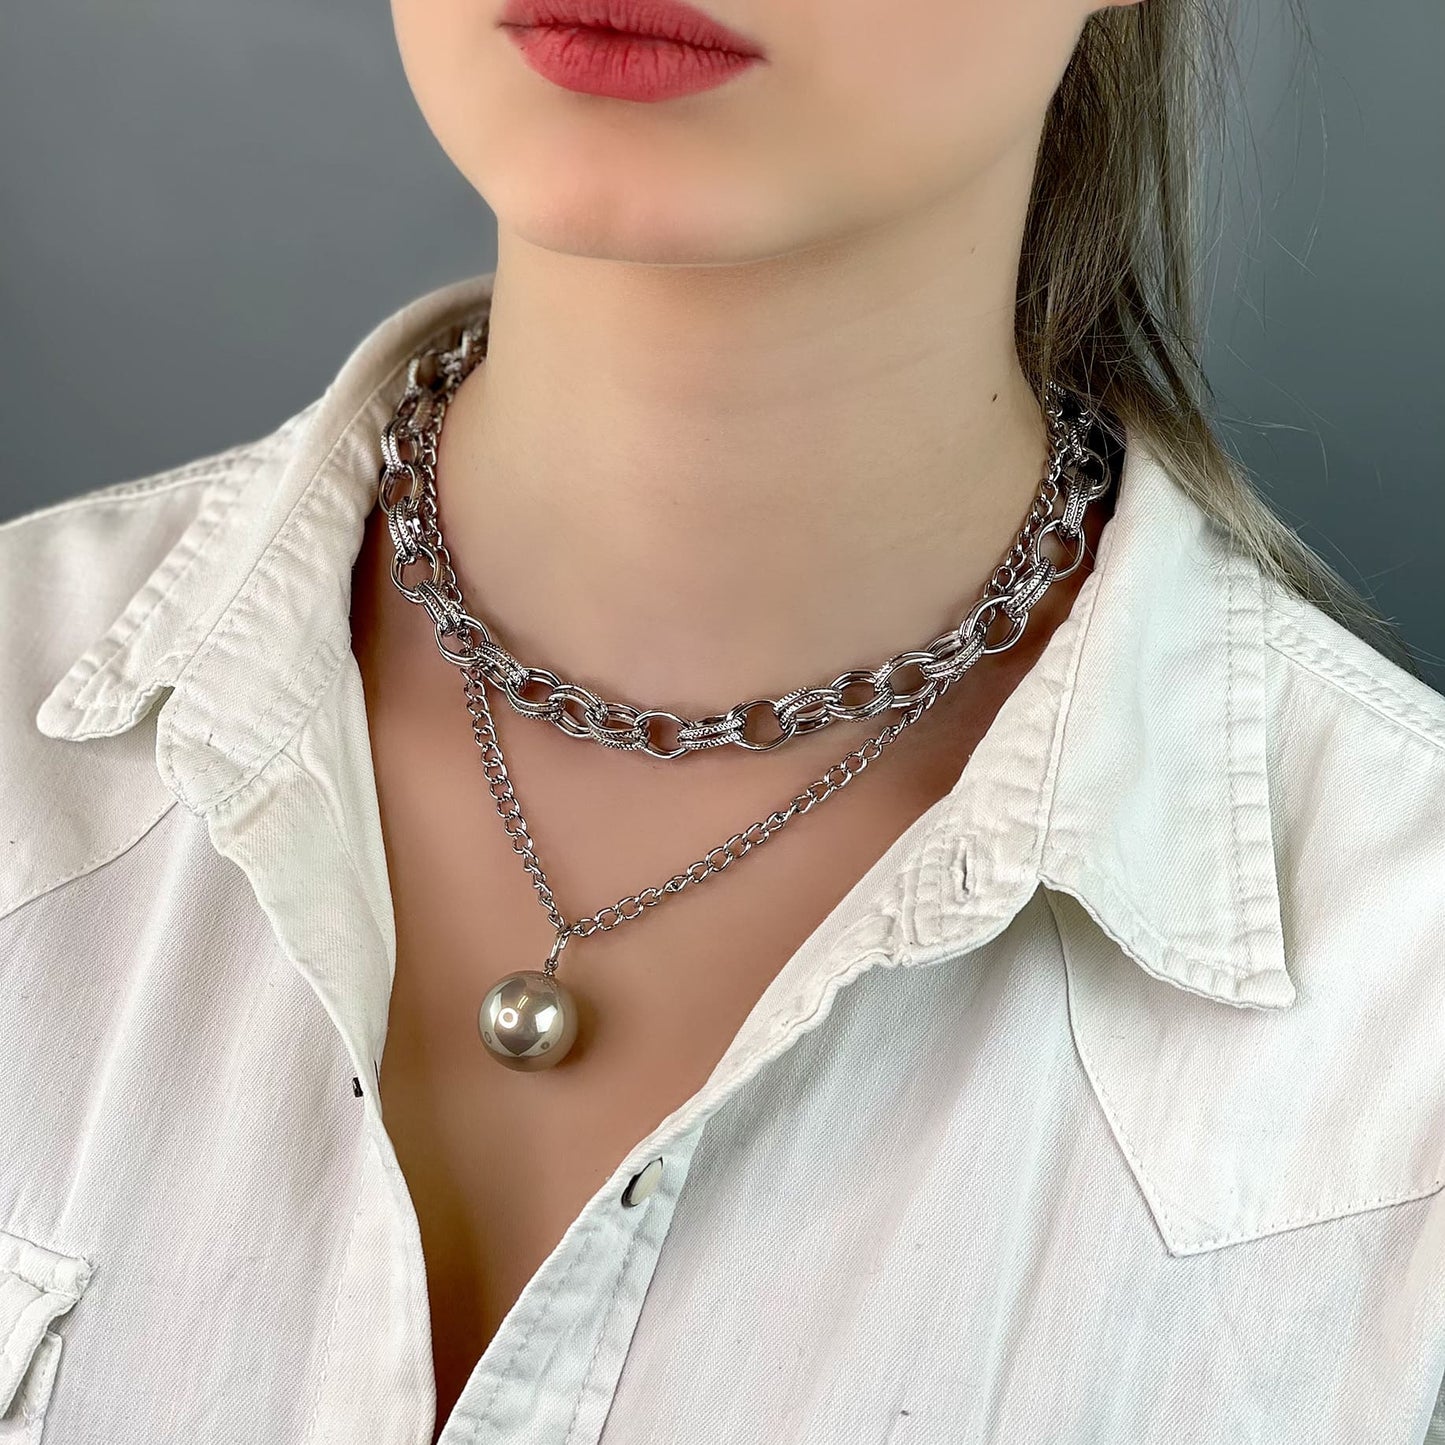 Silver Chain necklace with ball pendant